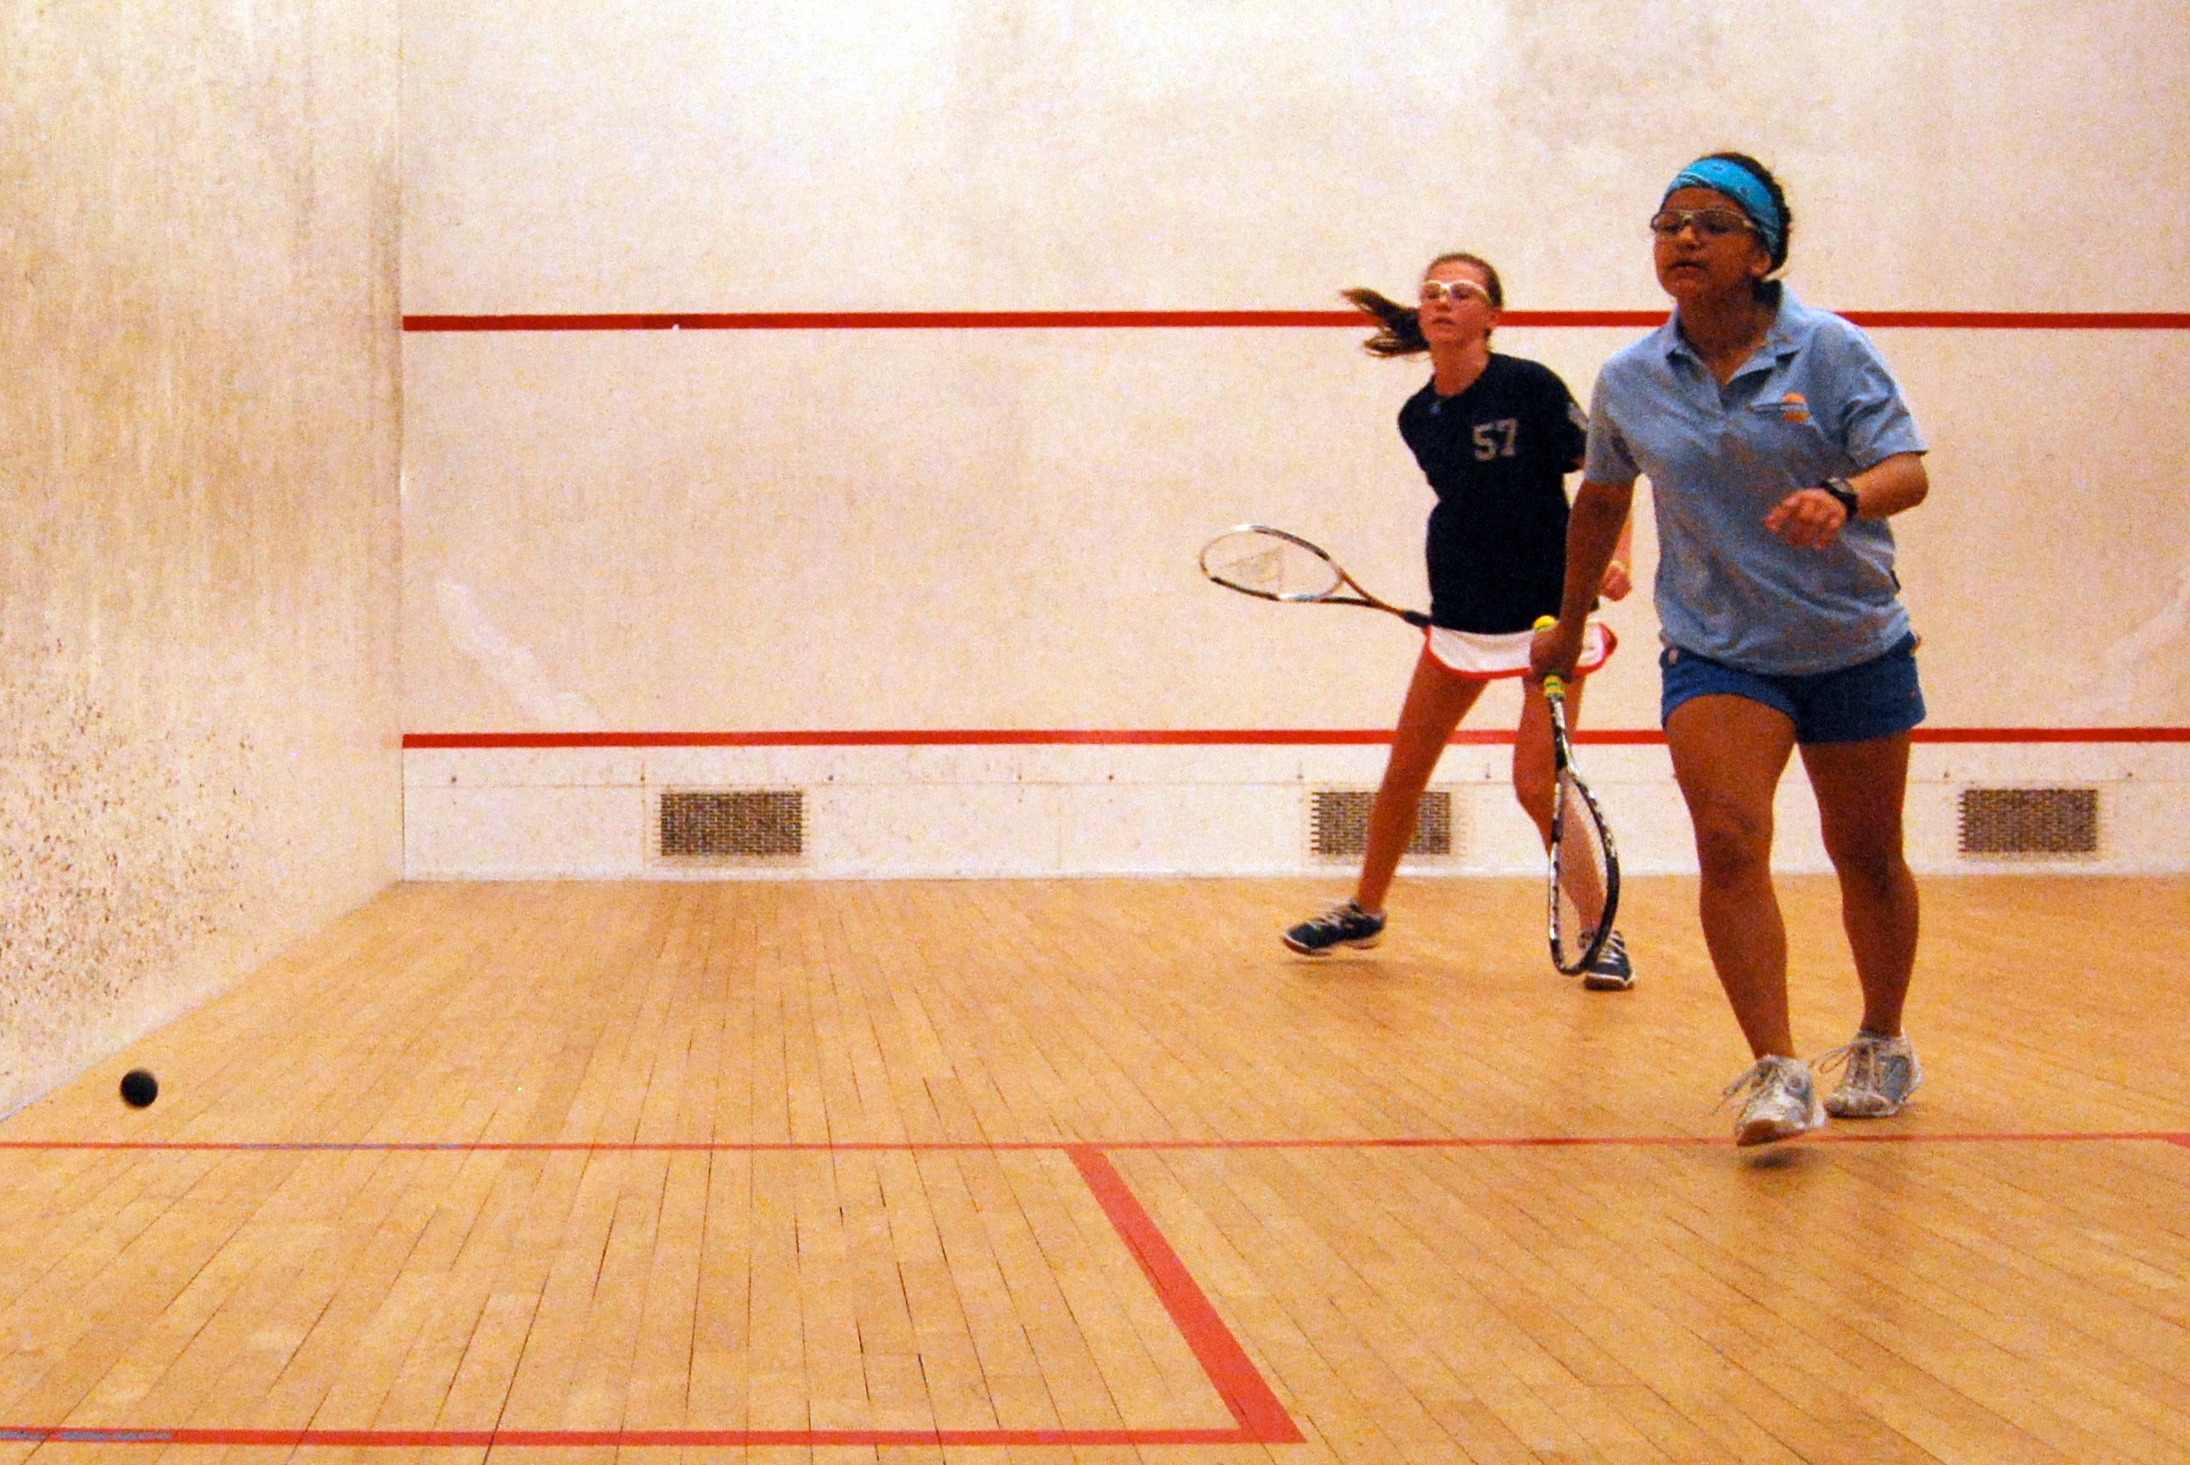 Libbie Maine won the GU17 in four games by stopping Reyna Pacheco (in light blue), who made the cross-country trek to Williamstown from Surf City Squash, San Diego’s Urban  Squash Program.